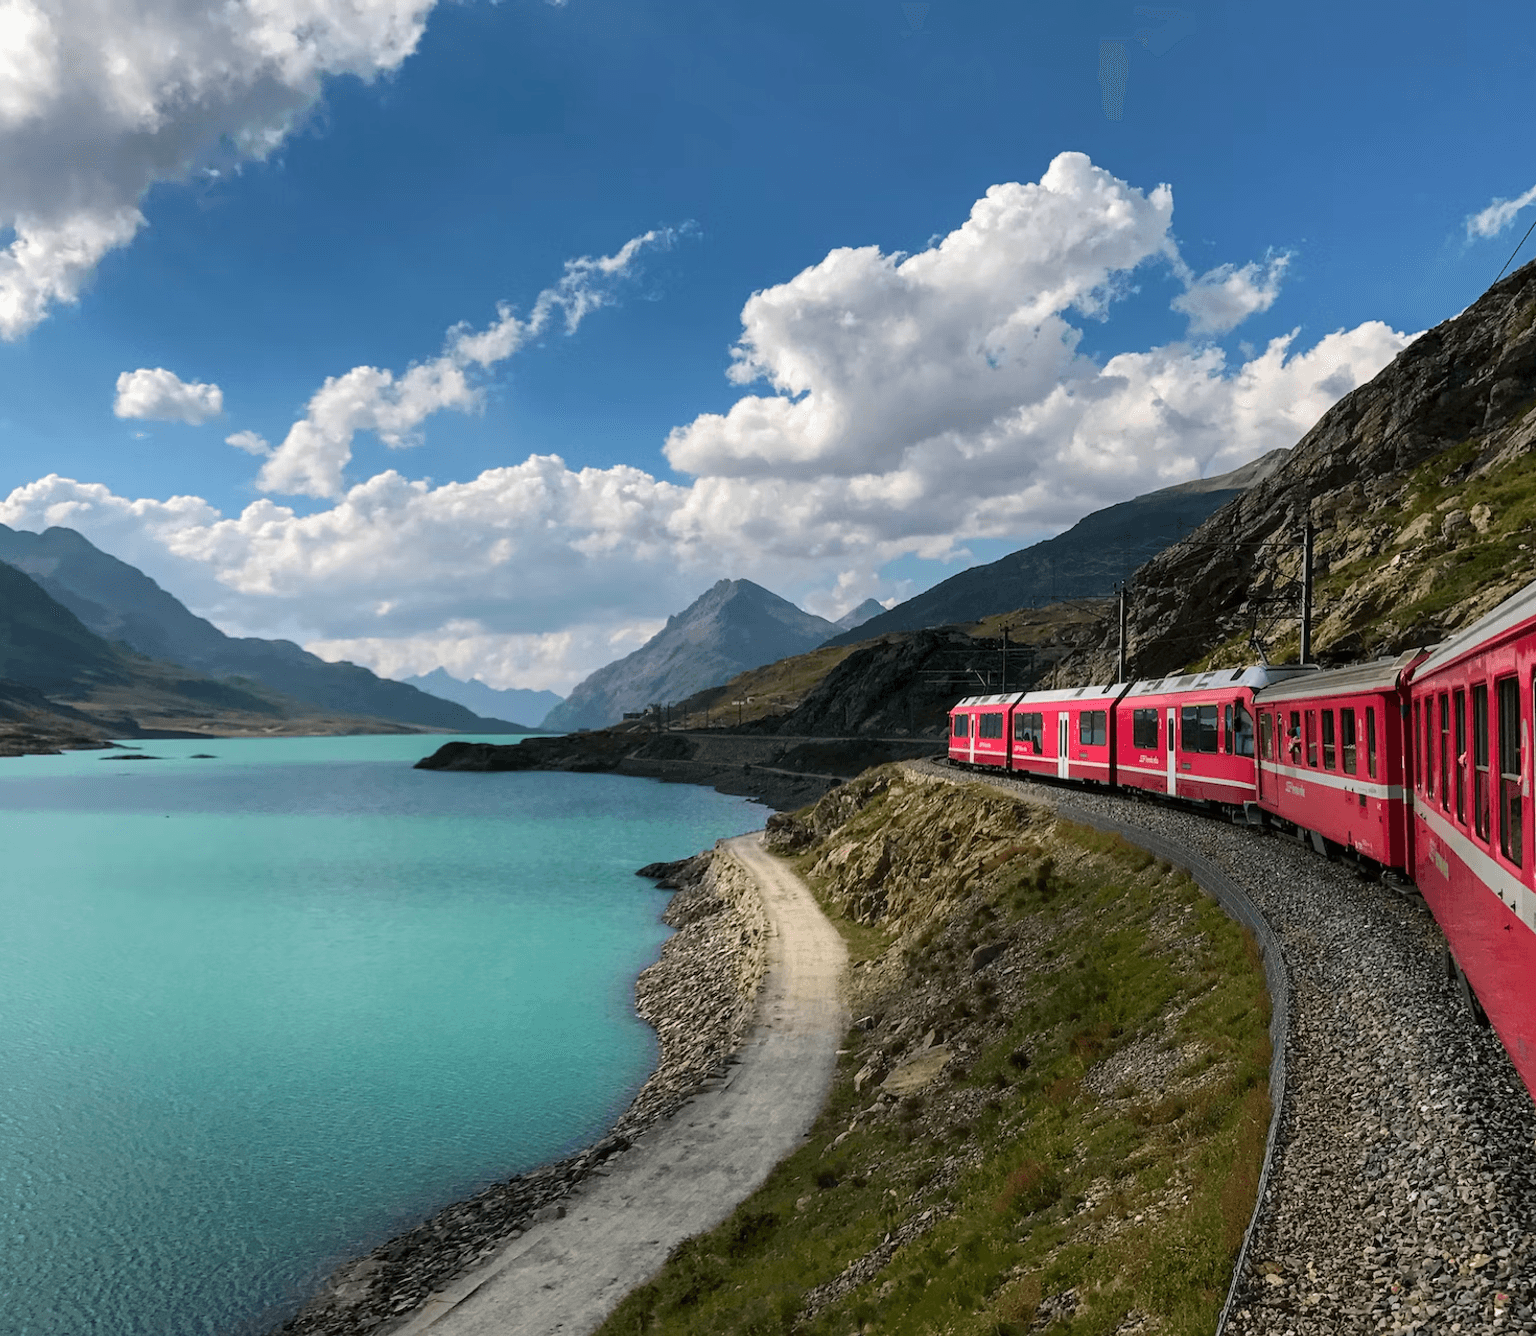 Lake with red train on the right side